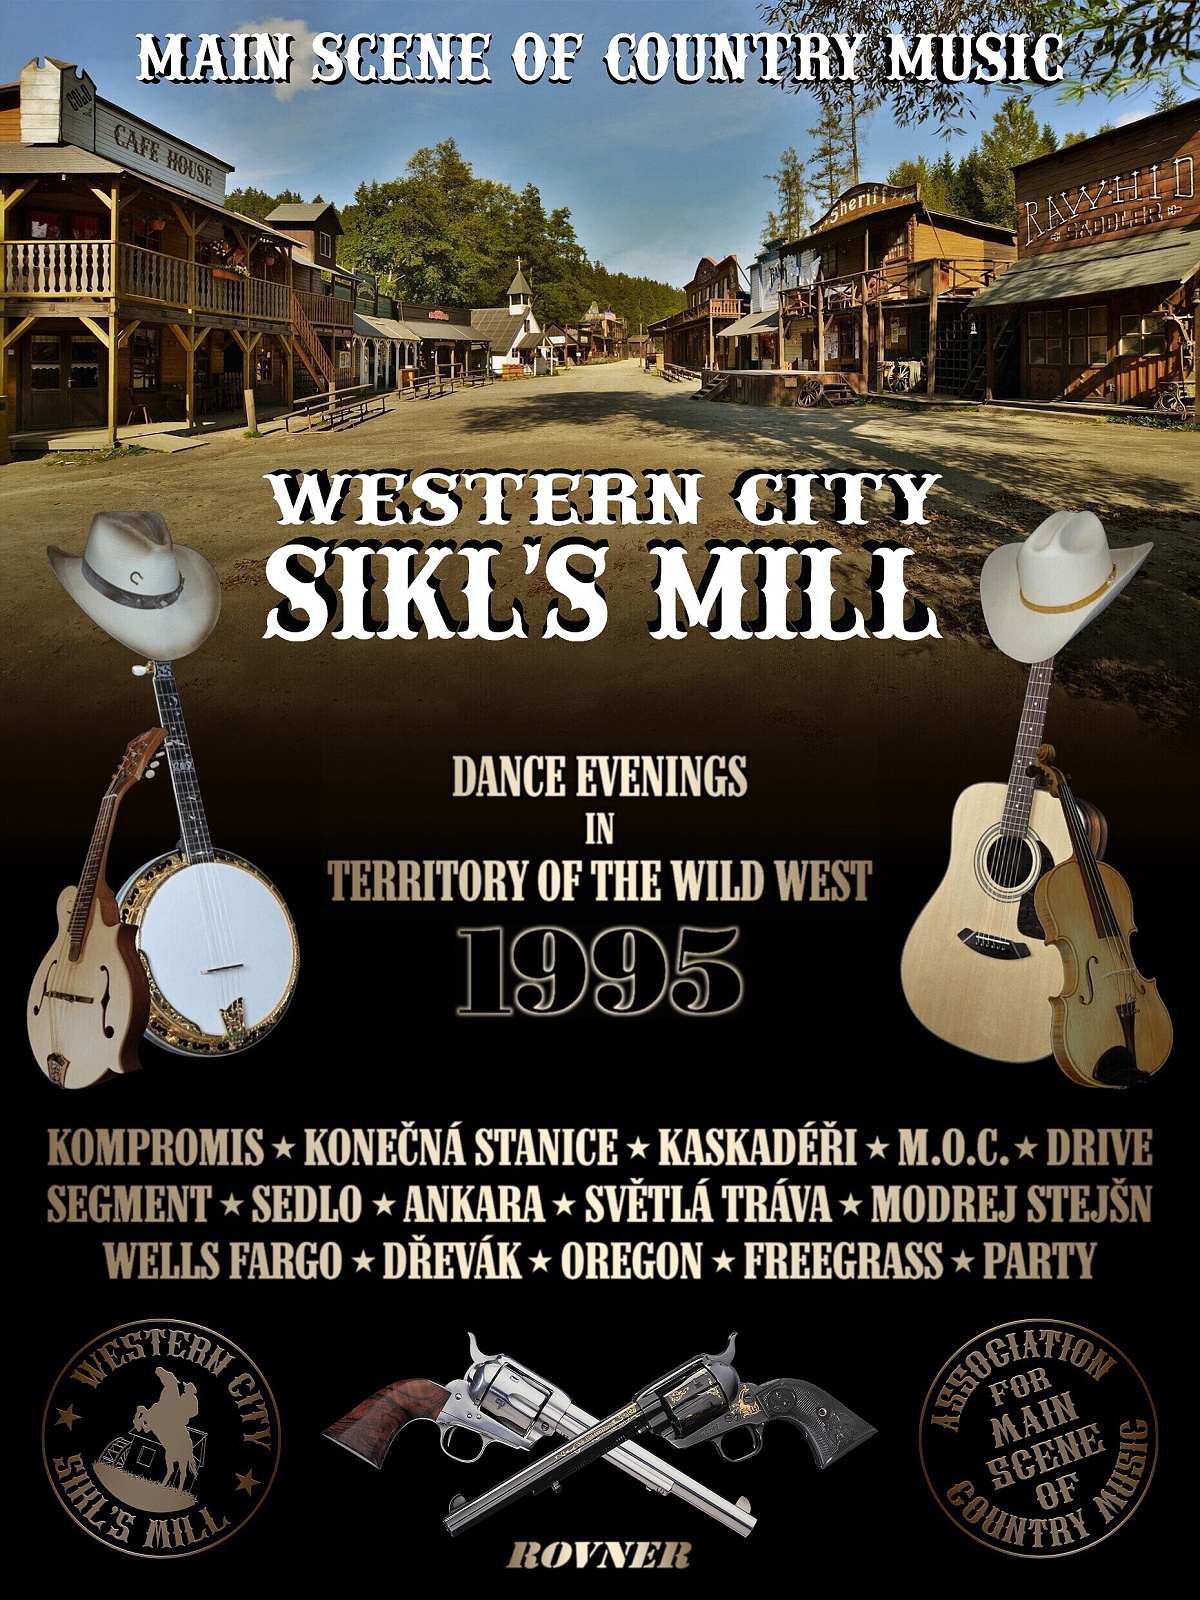 DANCE EVENINGS IN TERRITORY OF THE WILD WEST